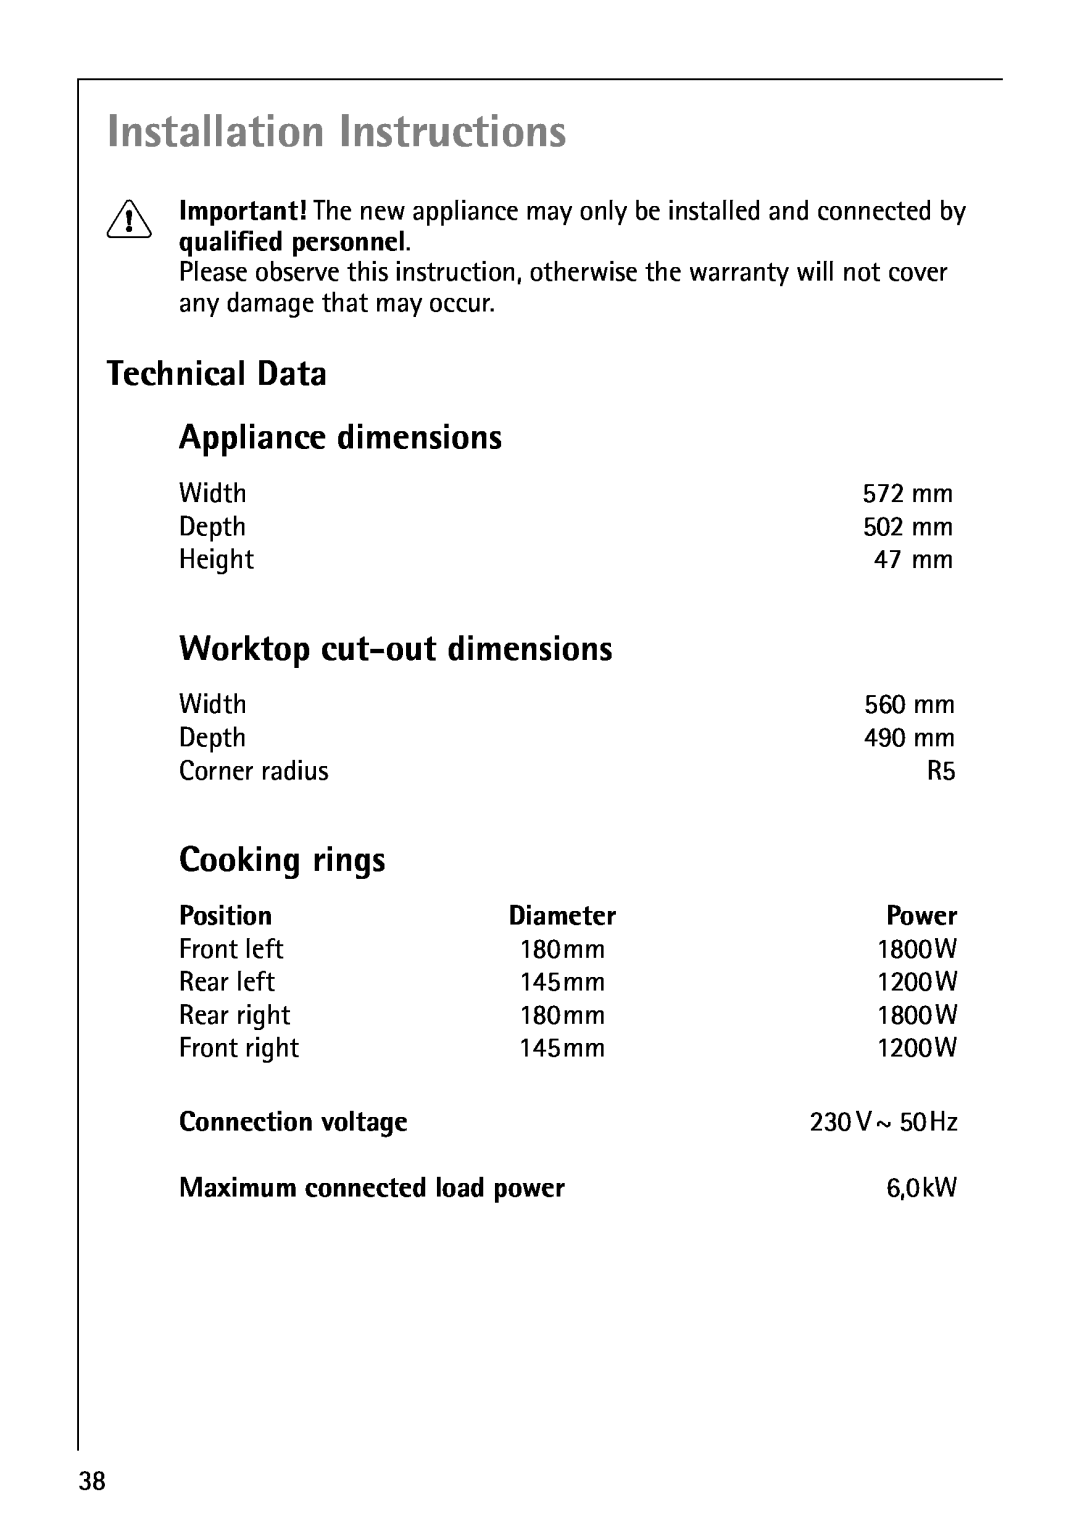 Electrolux 6000K Installation Instructions, Technical Data Appliance dimensions, Worktop cut-out dimensions, Cooking rings 